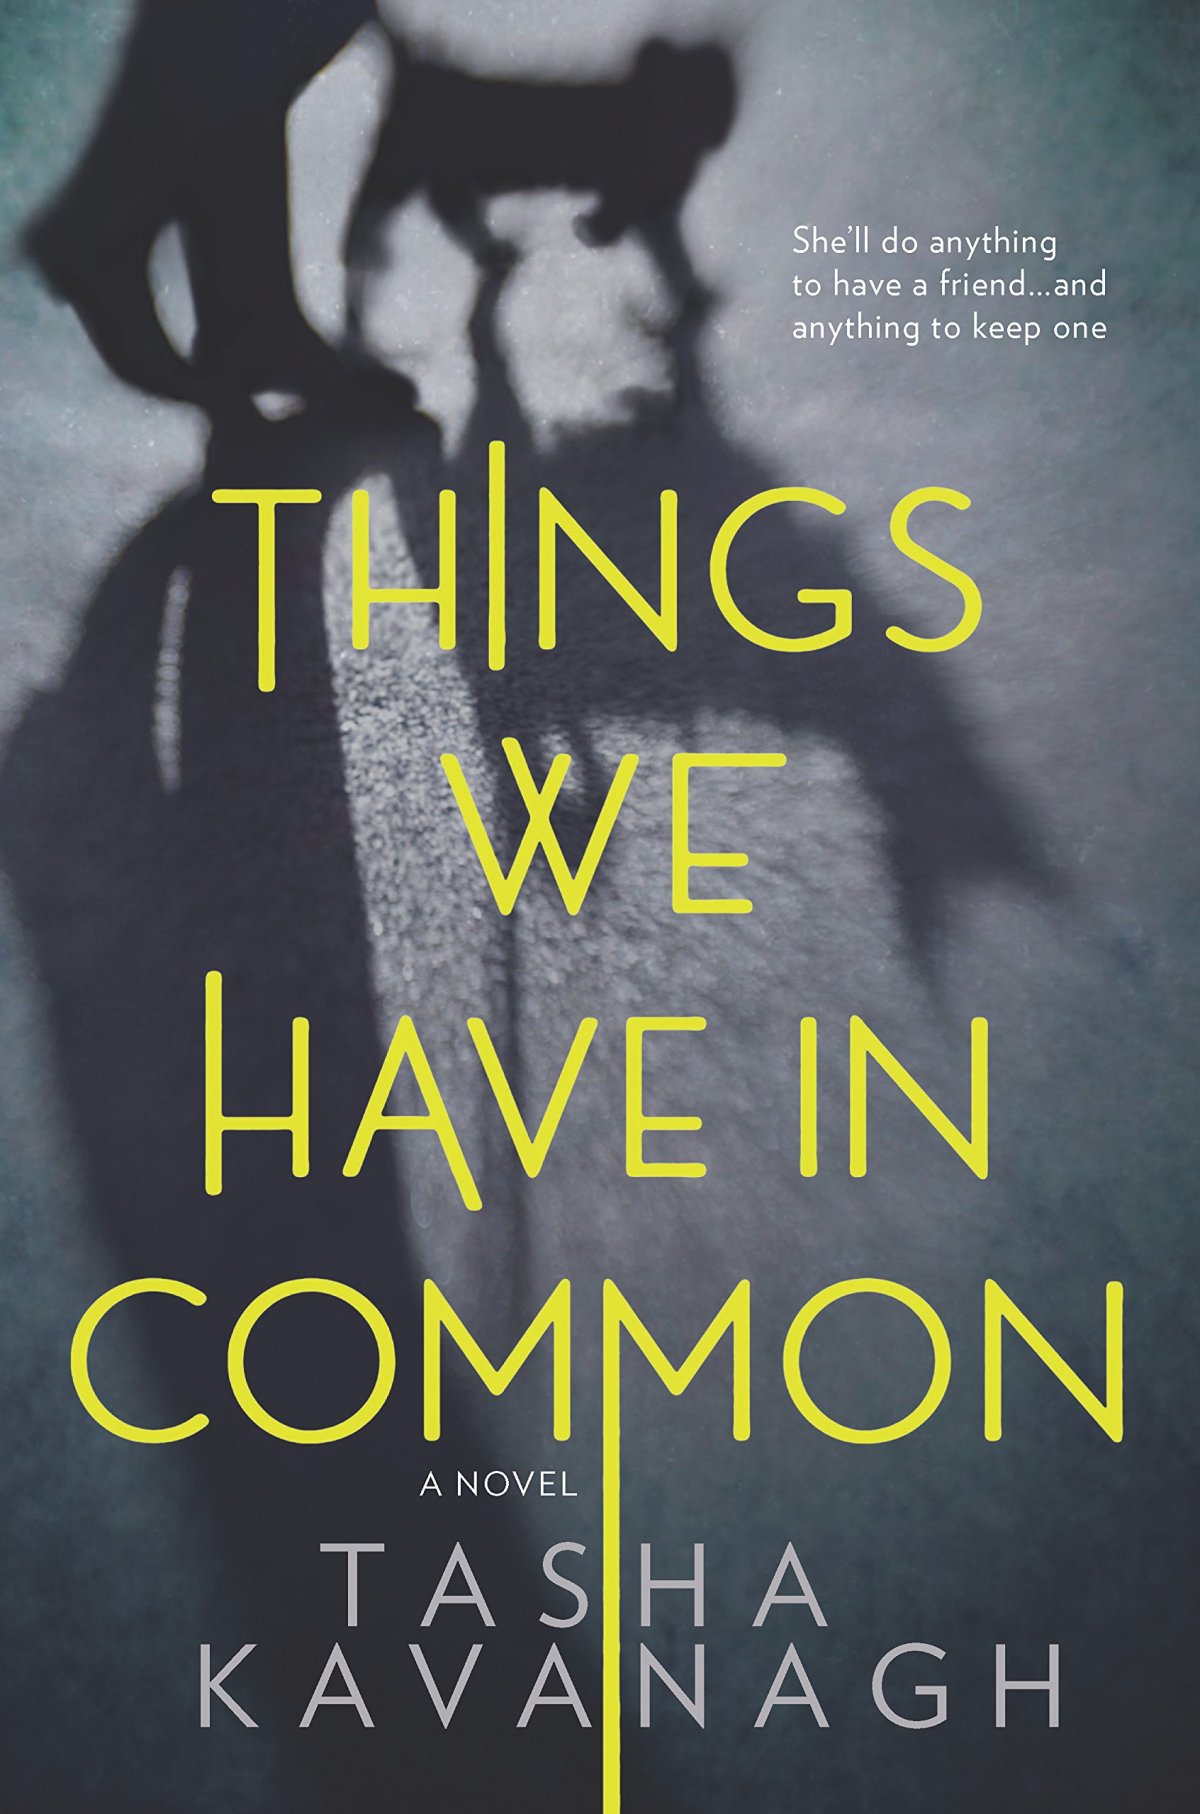 Book 160 – Things We Have in Common by Tasha Kavanagh